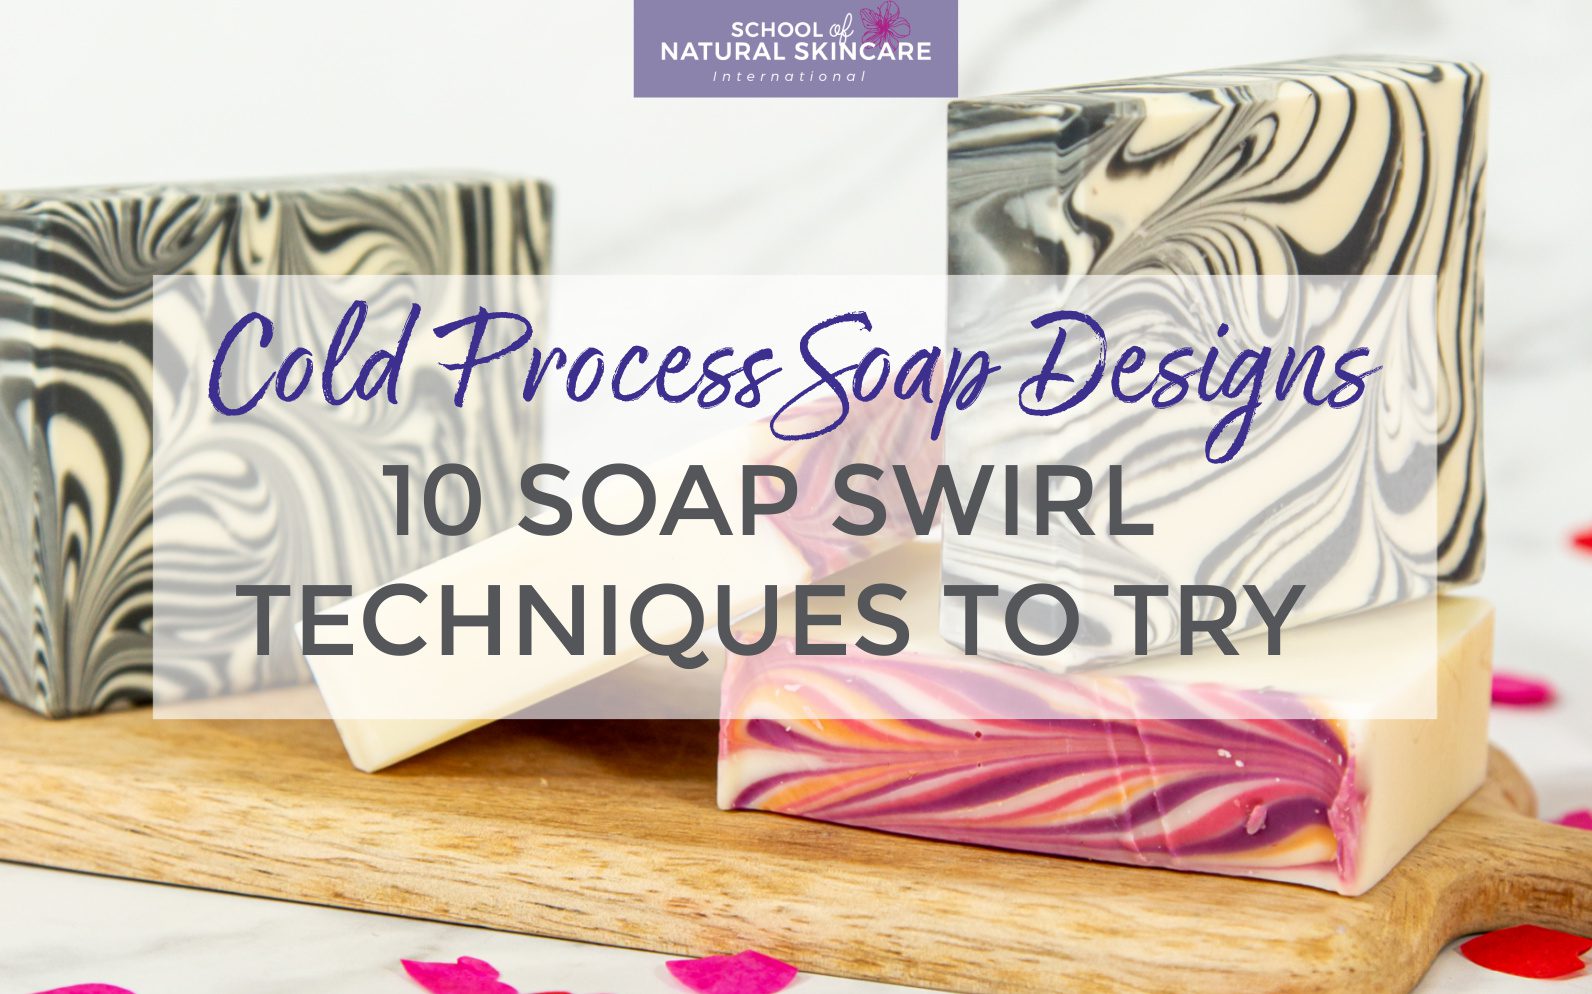 Cold Process Soap Designs: 10 Soap Swirl Techniques to Try - School of  Natural Skincare